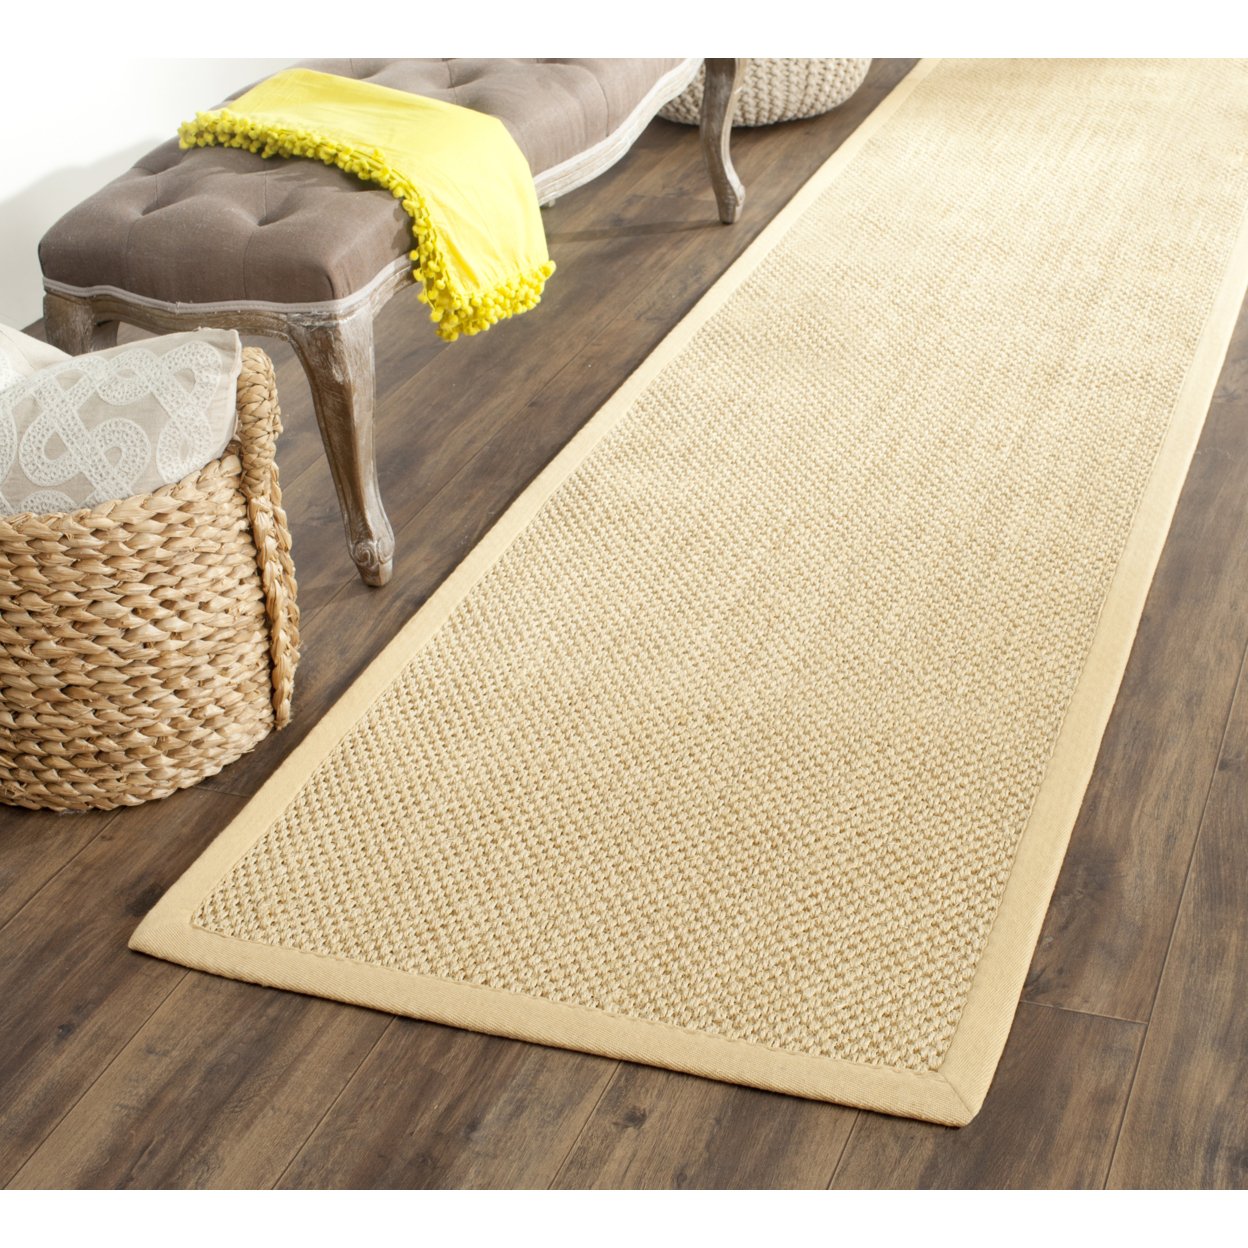 SAFAVIEH Natural Fiber Collection NF443A Maize/Wheat Rug - 2' 6 X 6'